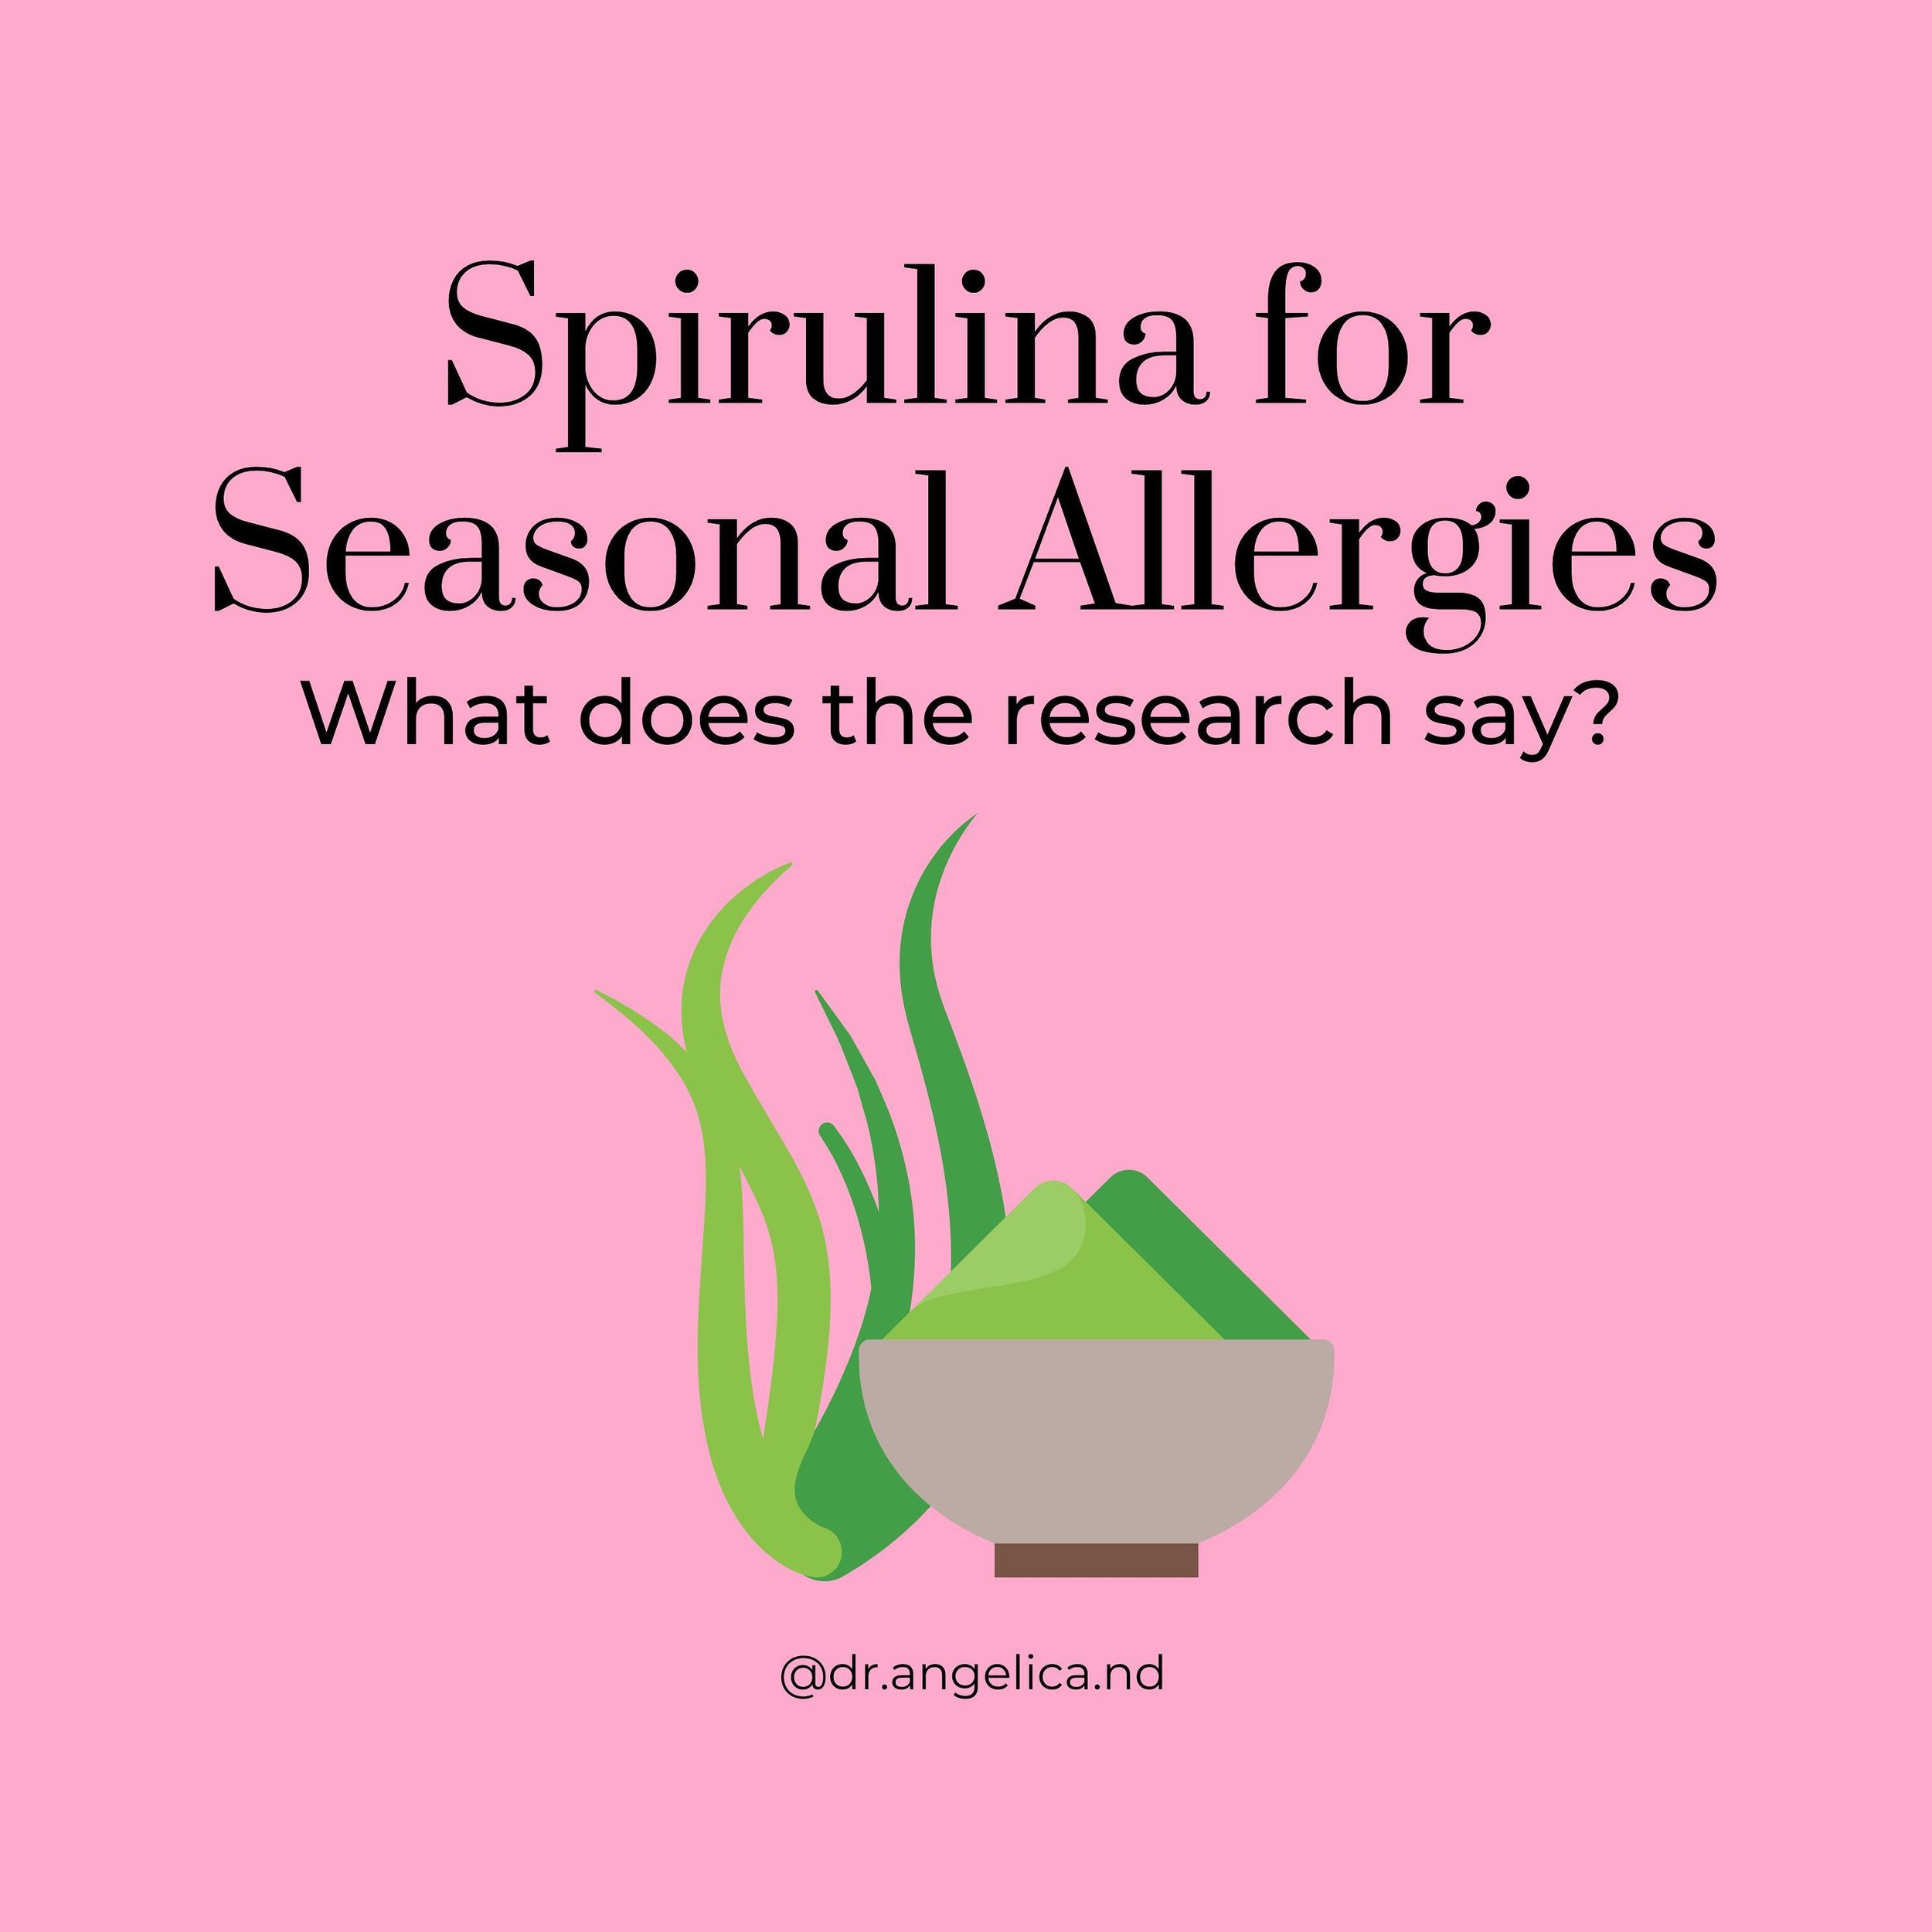 If you&rsquo;re suffering from seasonal allergies, listen up! 📣

According to some research, spirulina can make a huge difference in seasonal allergy symptoms including runny nose and congestion, as well as quality of life (better sleep and daytime 